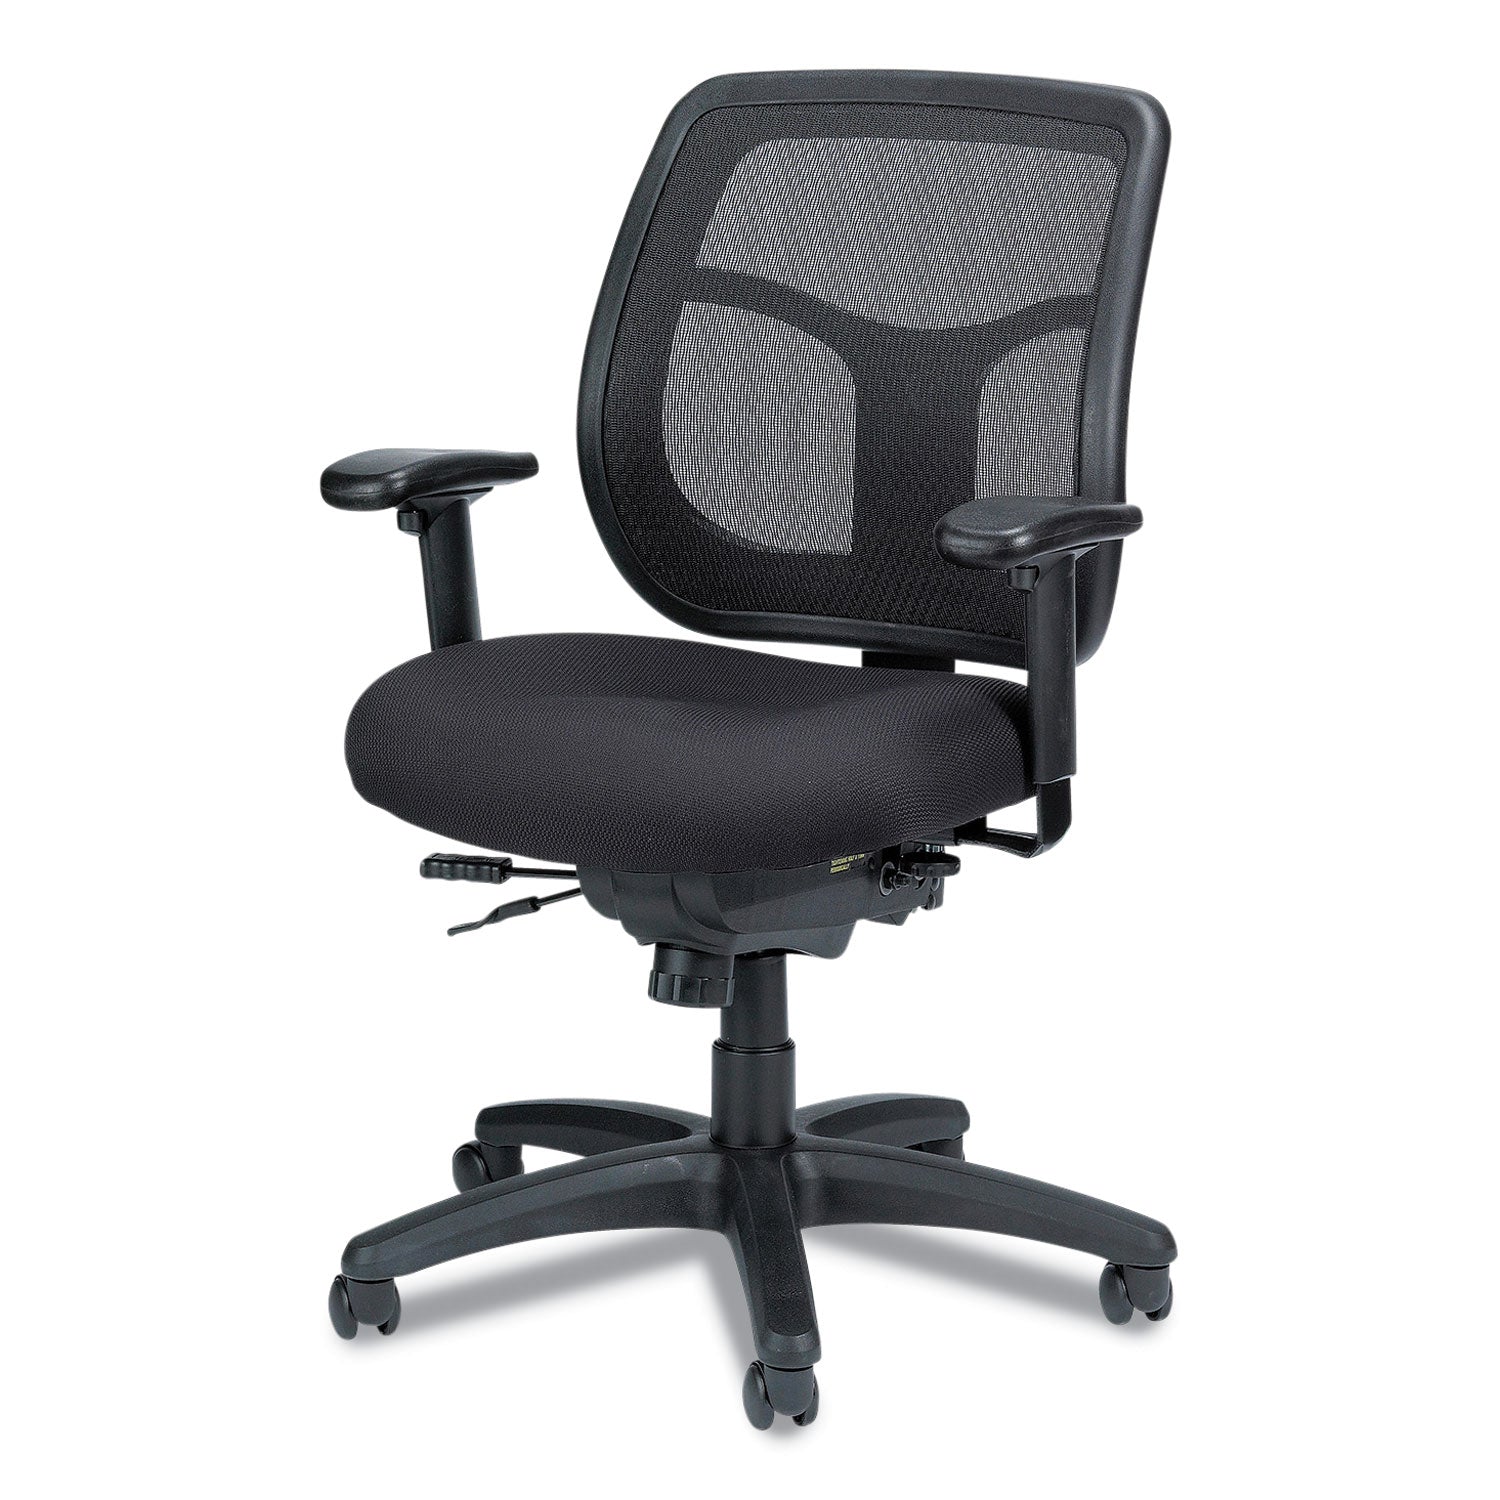 apollo-multi-function-mesh-task-chair-supports-up-to-250-lb-189-to-224-seat-height-silver-seat-back-black-base_eutmft945sl - 2